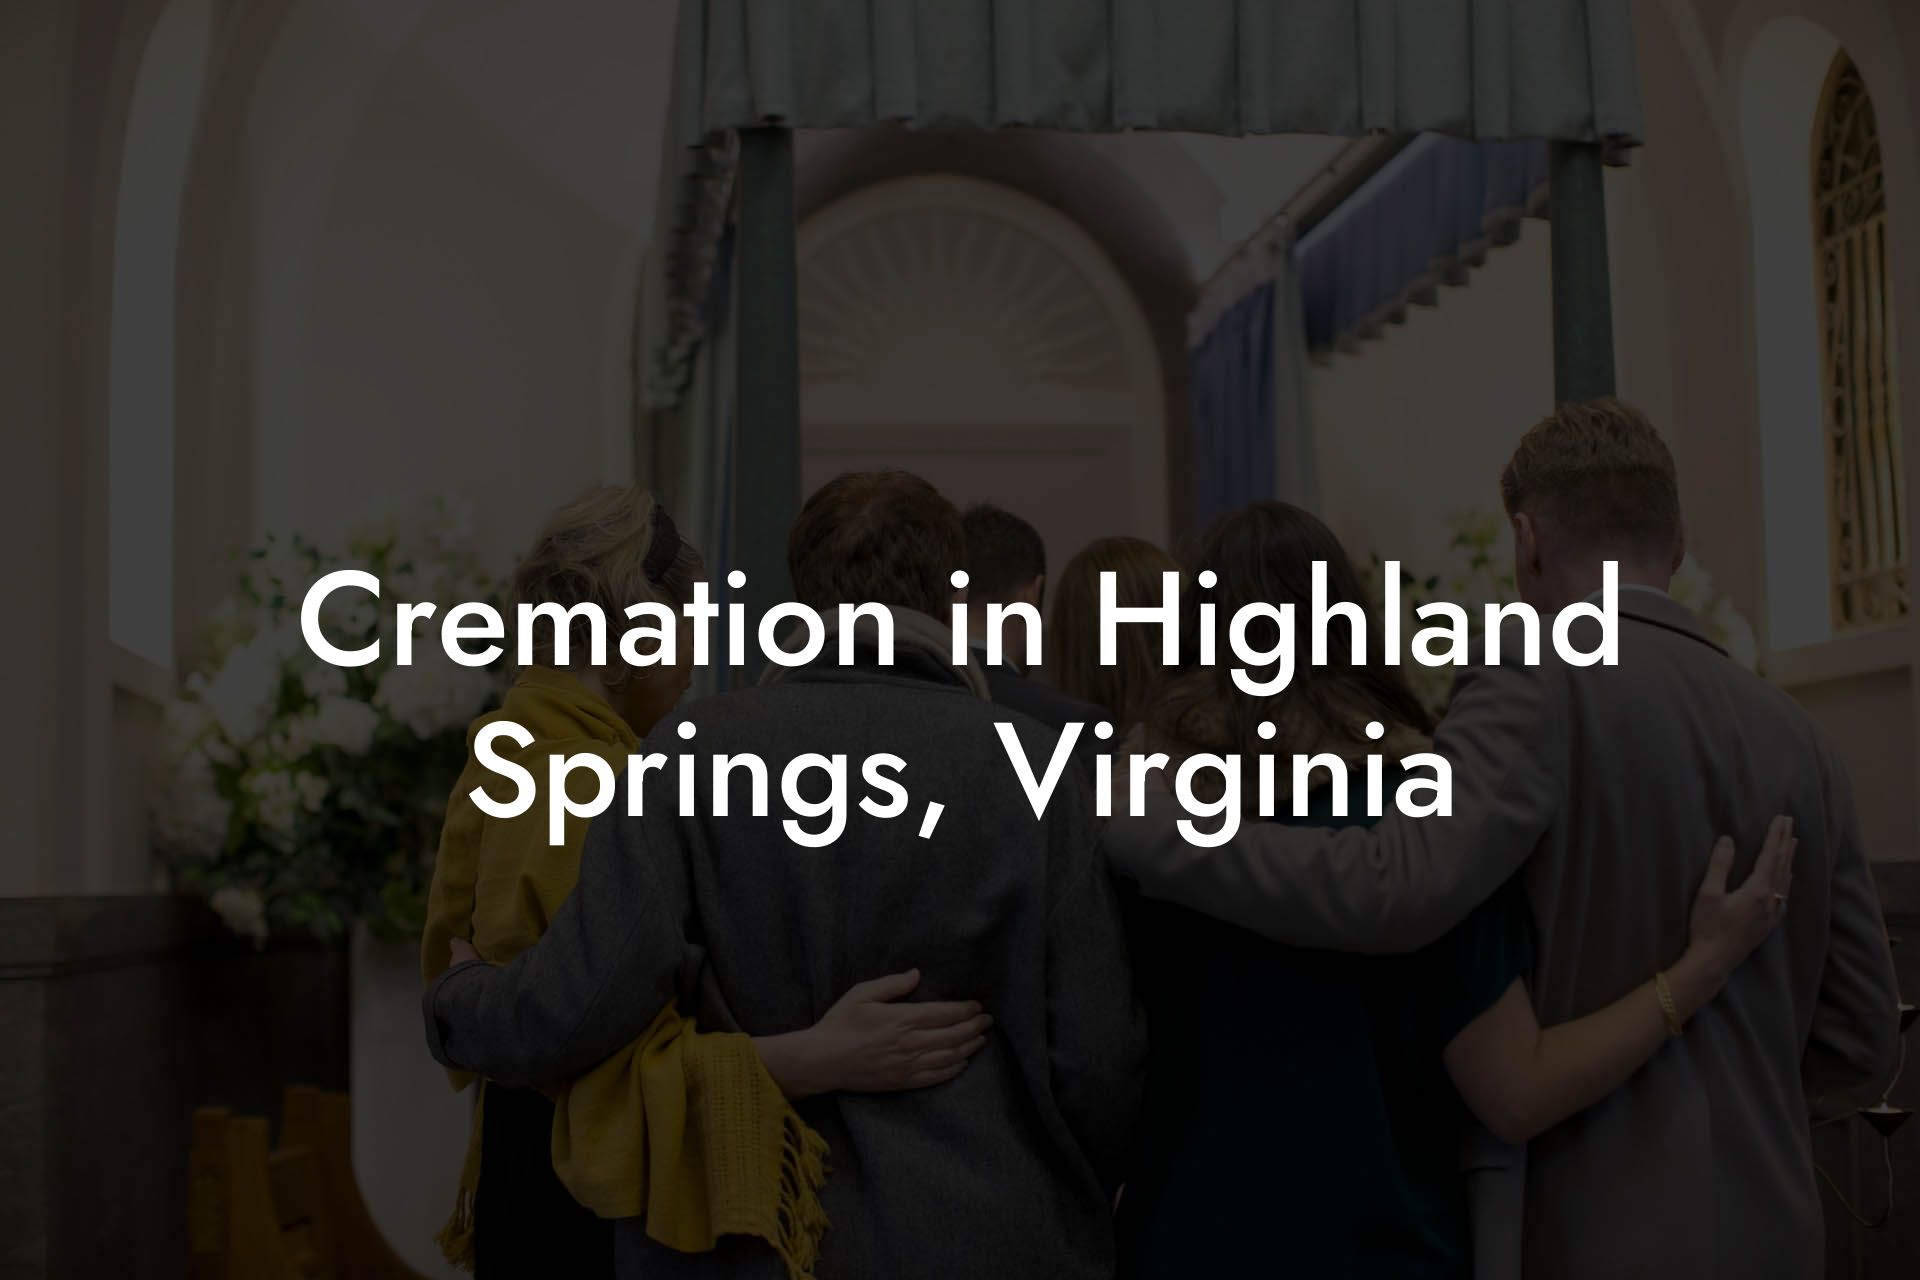 Cremation in Highland Springs, Virginia